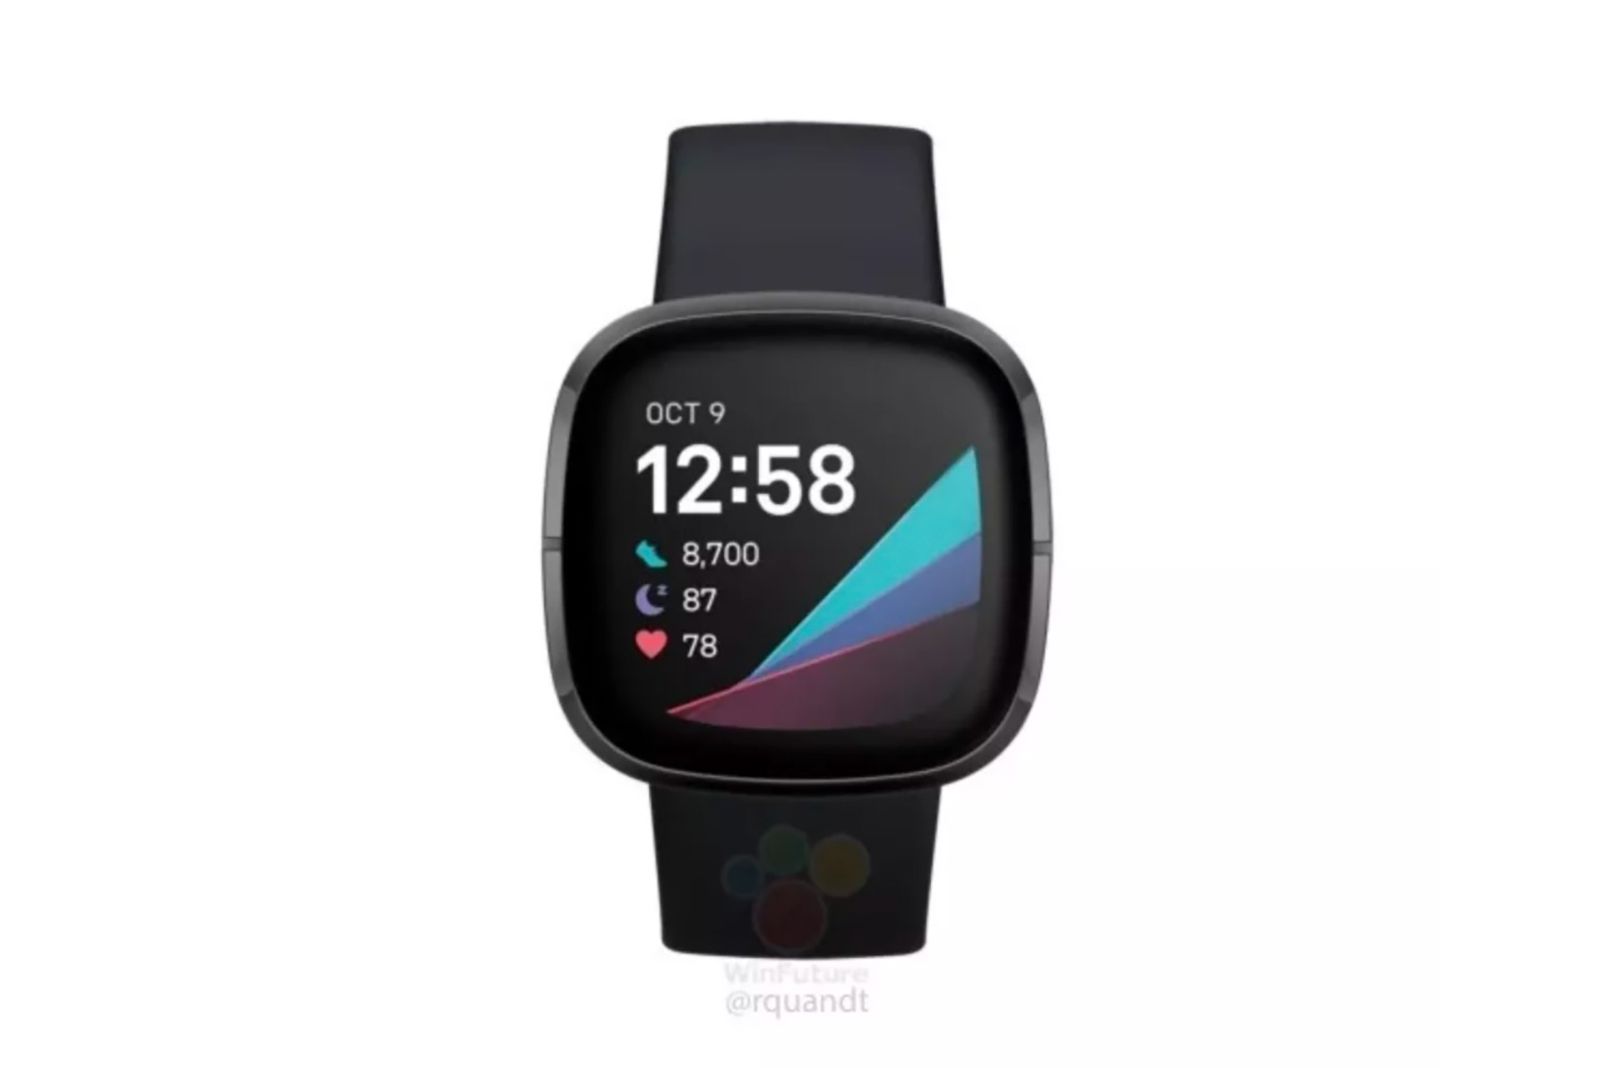 Fitbit Versa 3 and Fitbit Sense button-less smartwatches revealed in leaked images photo 3